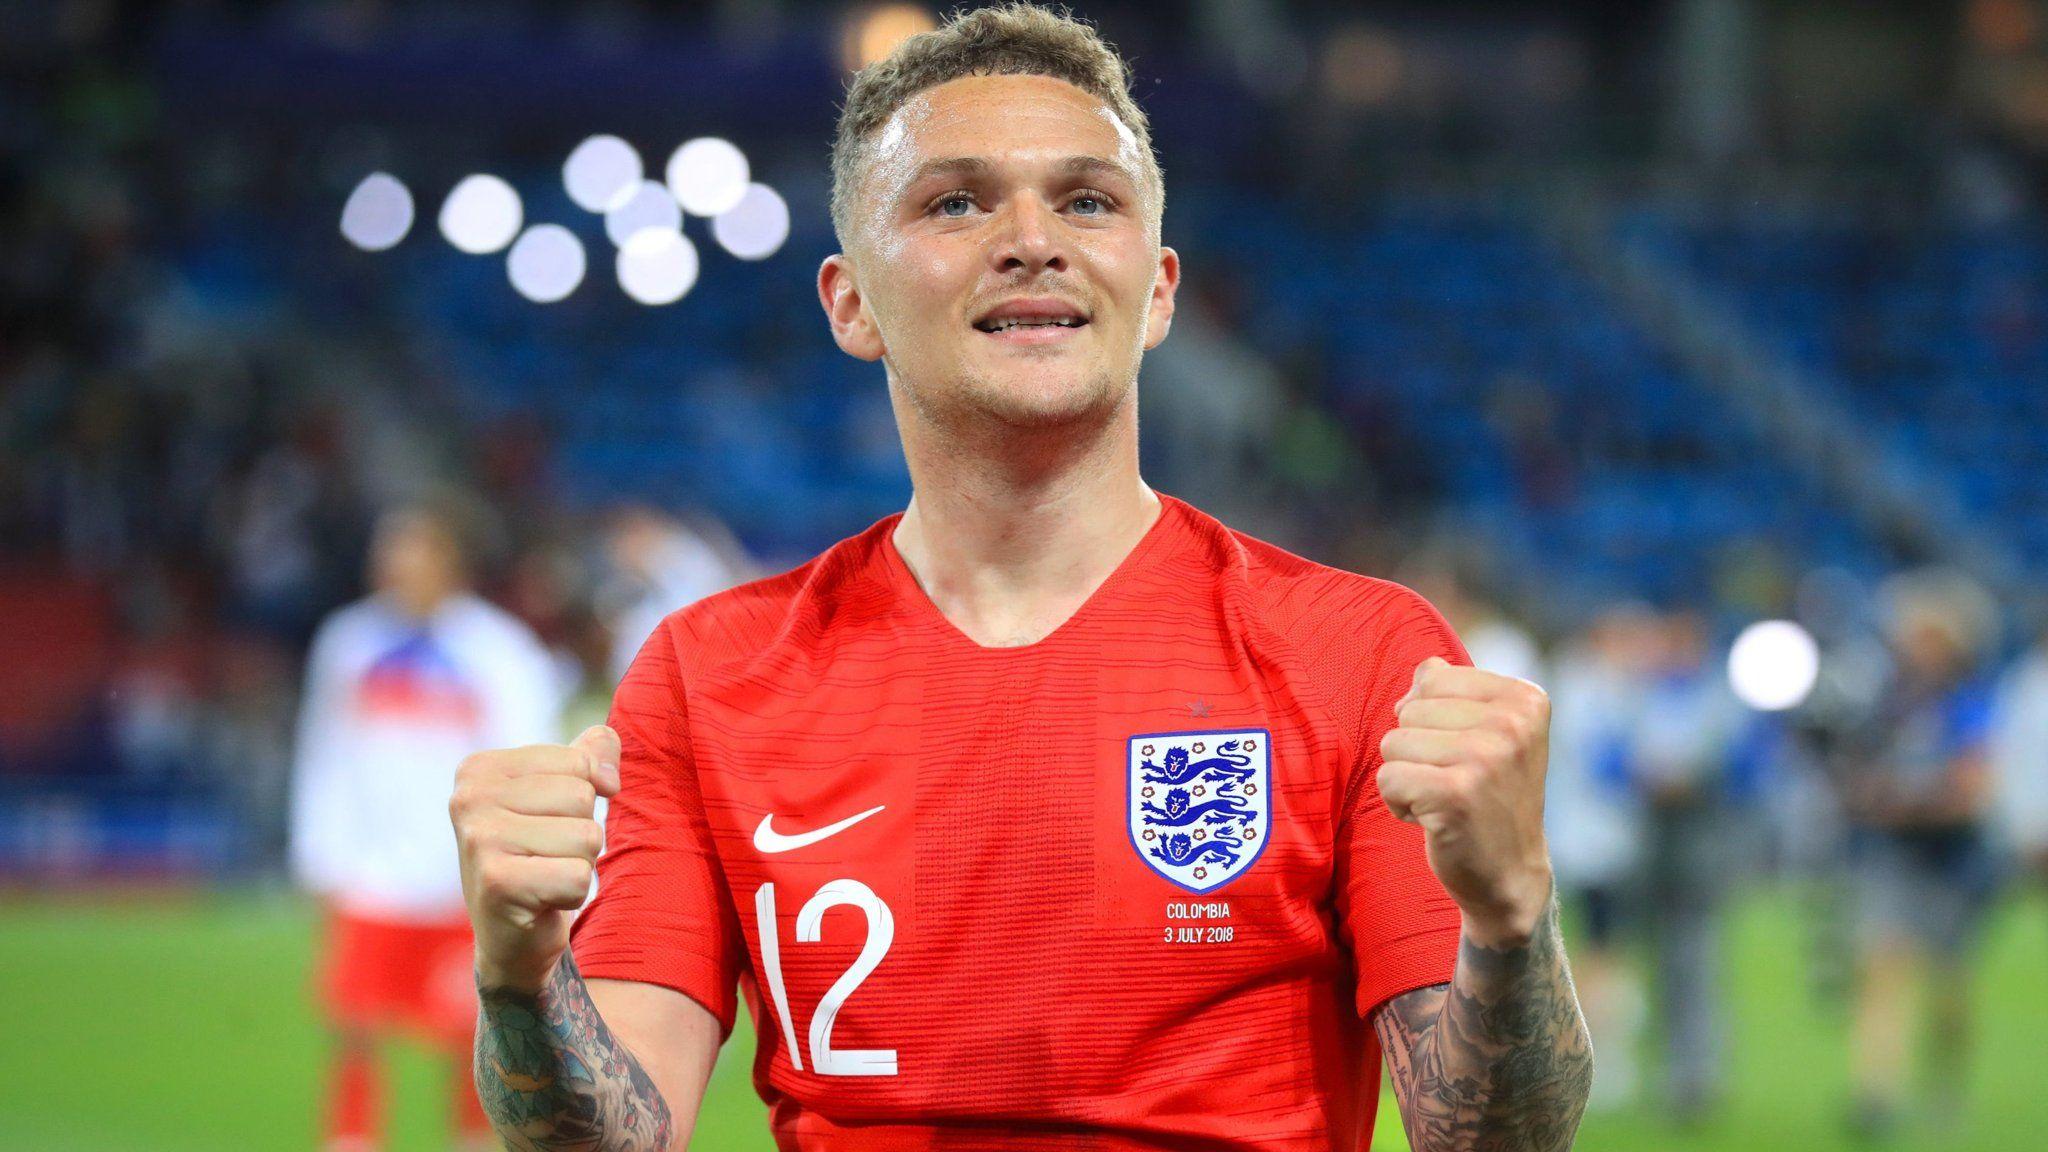 Trippier's journey from fringe player to England World Cup star